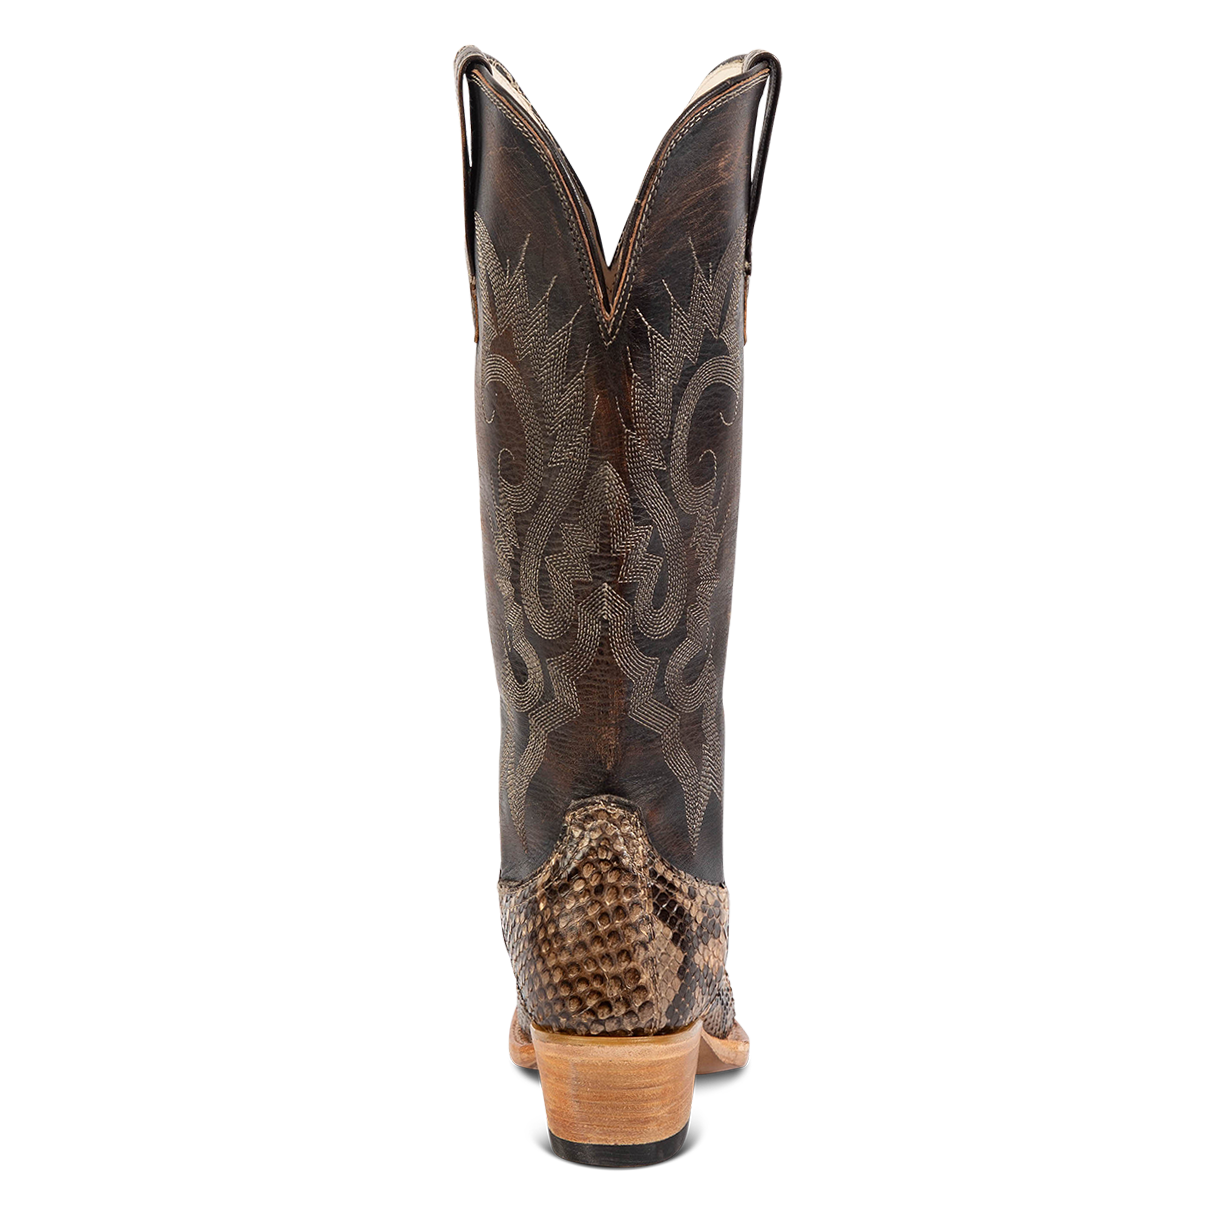 Back view showing back dip and leather heel with western stitch detailing on FREEBIRD women's Woodland beige python multi leather boot